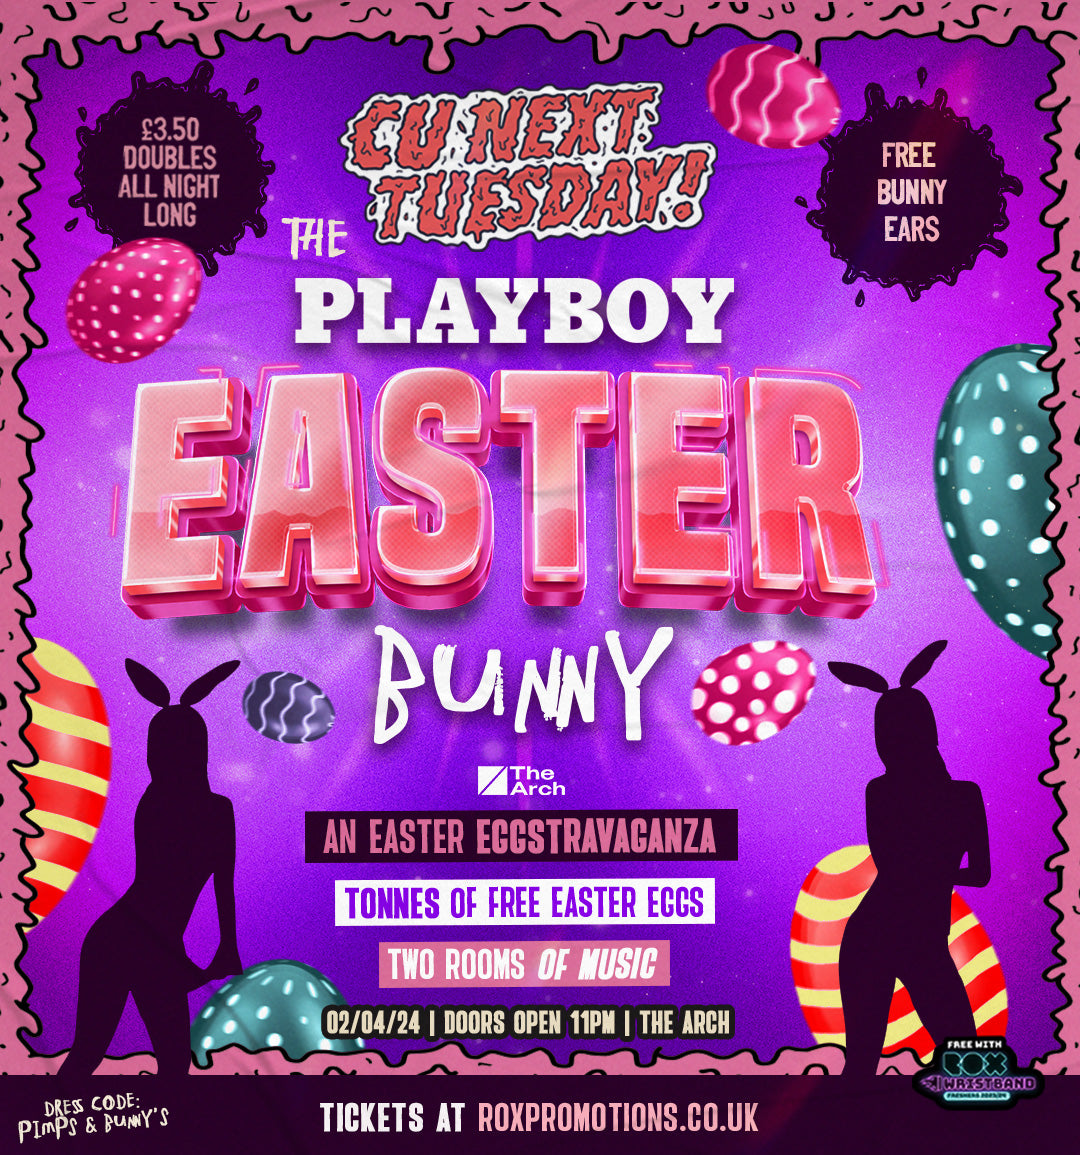 CU NEXT TUESDAY | THE PLAYBOY EASTER BUNNY🐰 - EASTER SPECIAL | 02/04/24